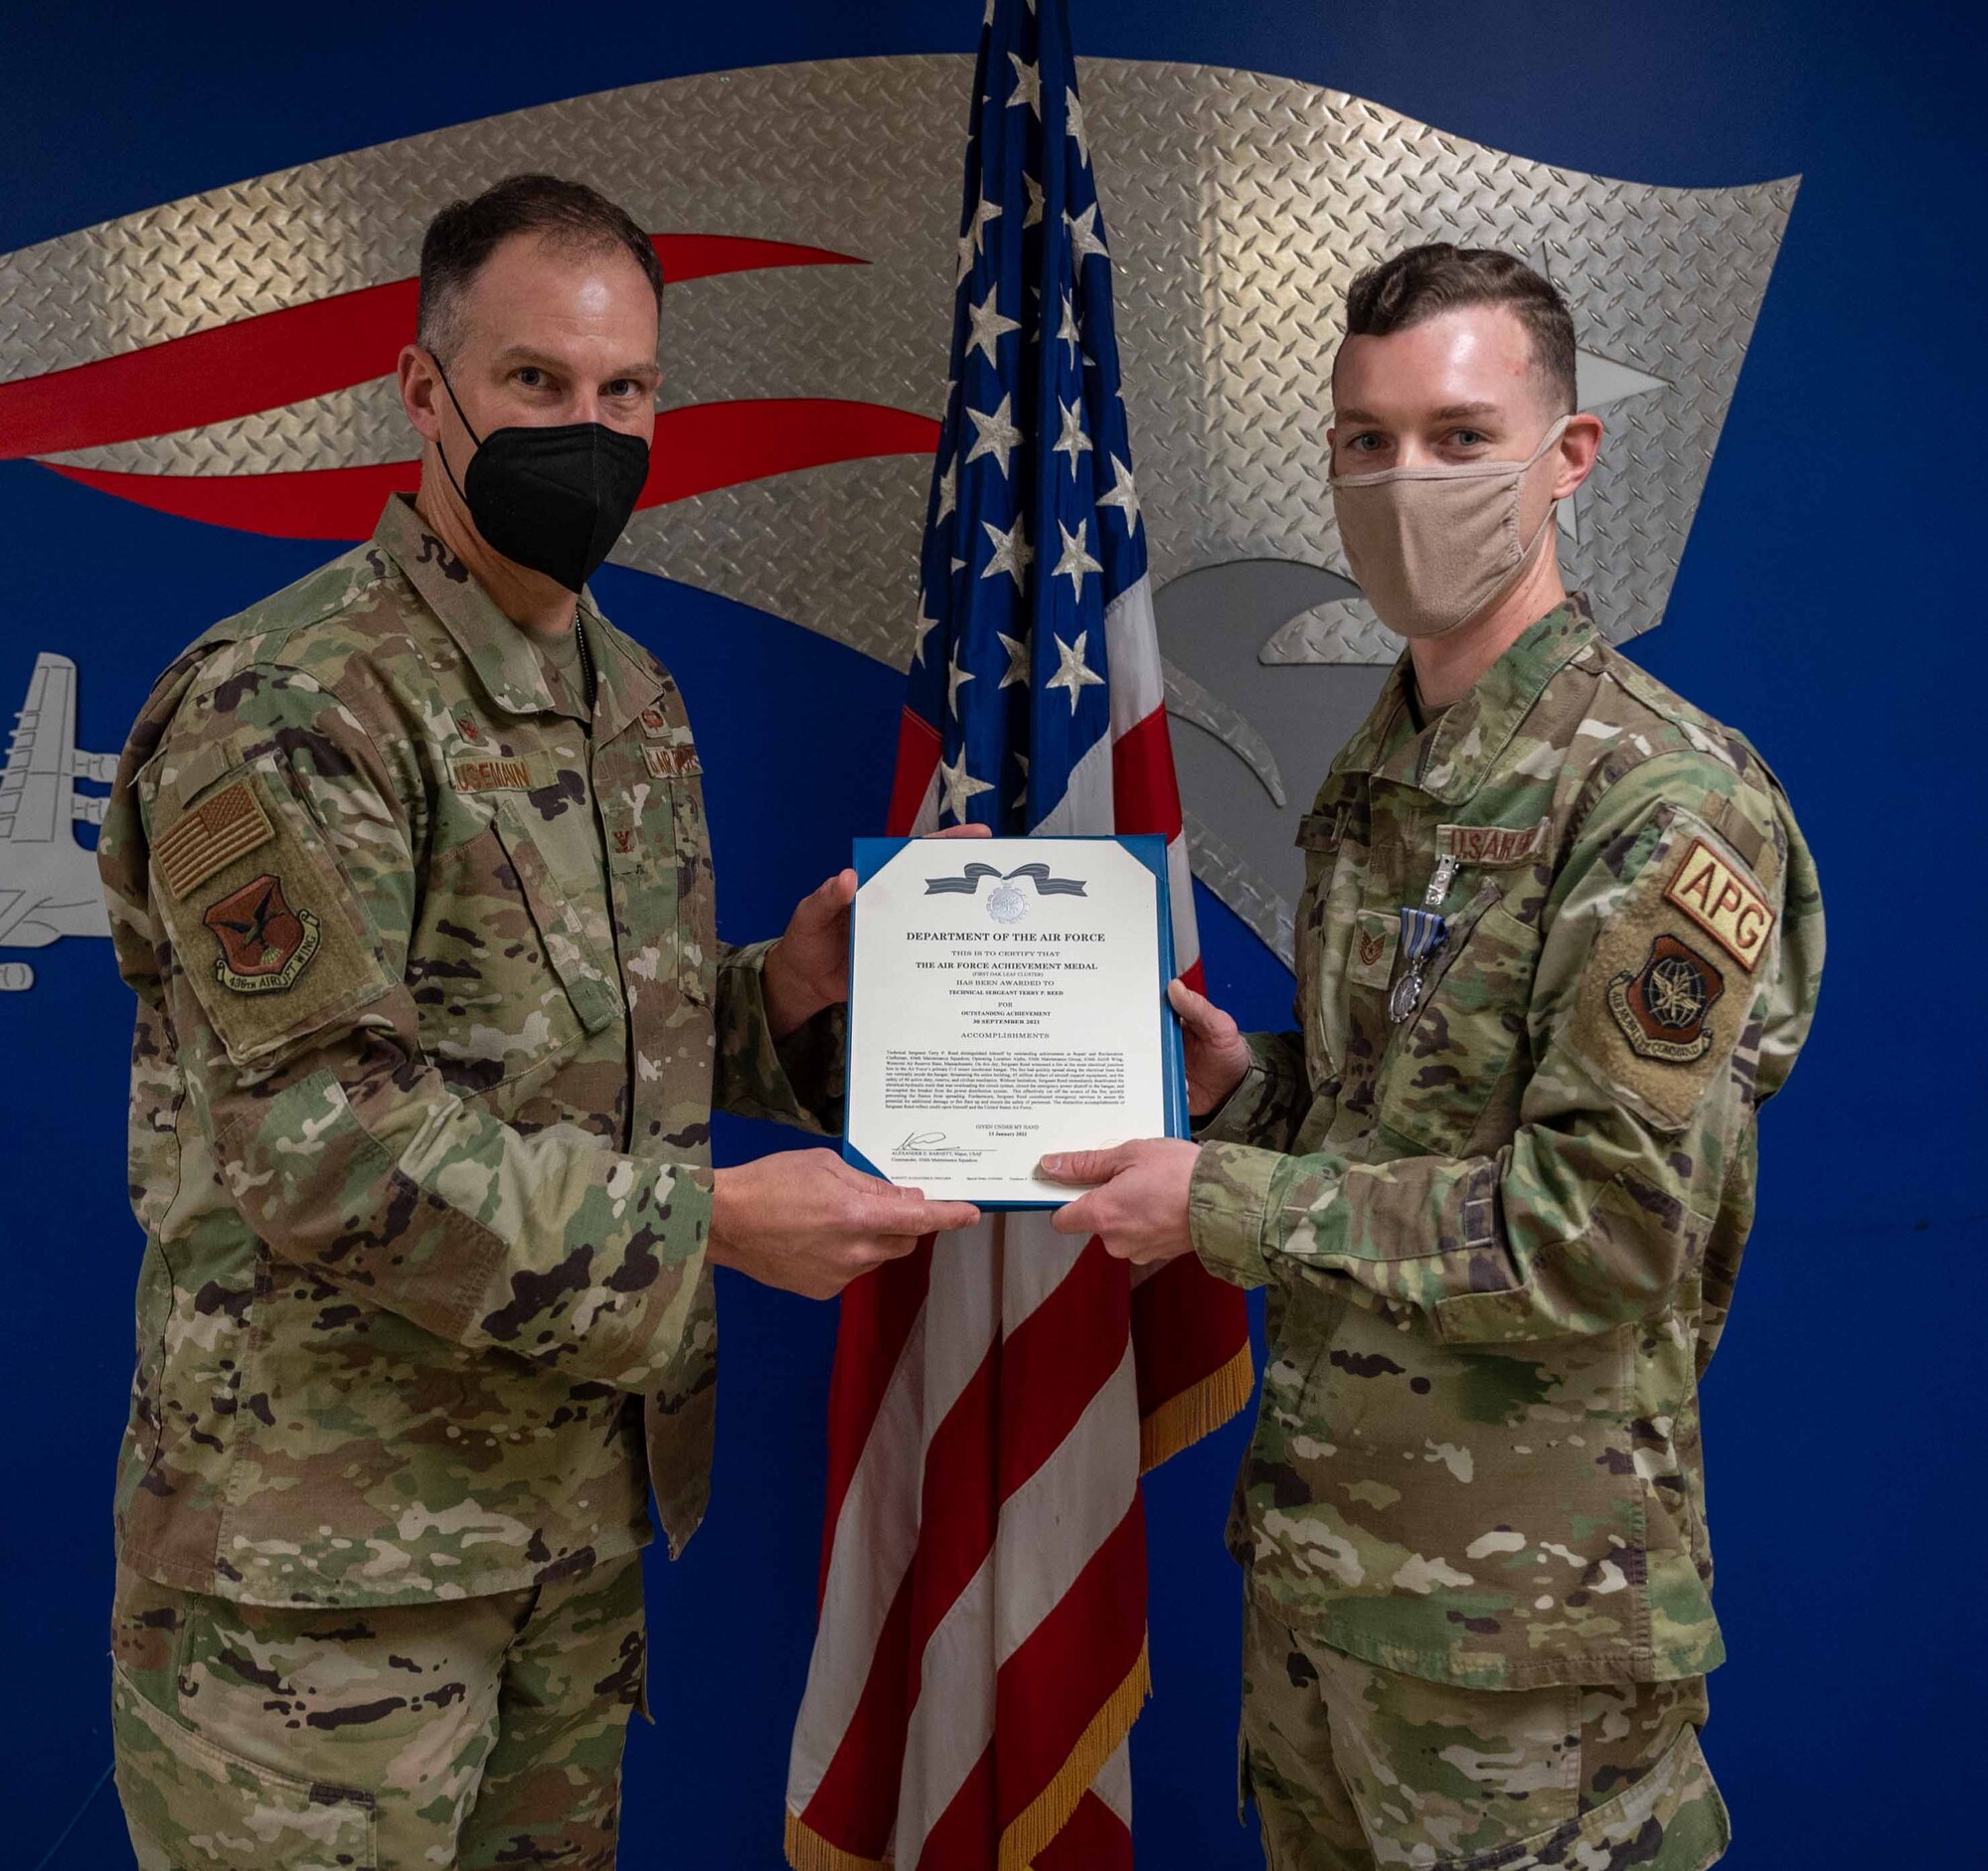 Col. Matt Husemann, 436th Airlift Wing commander (left), presents an Air Force Achievement Medal to Tech. Sgt. Terry Reed, 436th Maintenance Squadron, Operating Location Alpha, repair and reclamation craftsman, at Westover Air Reserve Base, Massachusetts, Jan. 25, 2022. Reed was presented the medal for witnessing a fire in a C-5 Isochronal Maintenance Dock and performing heroic actions to extinguish it. (U.S. Air Force photo by Senior Airman Faith Schaefer)